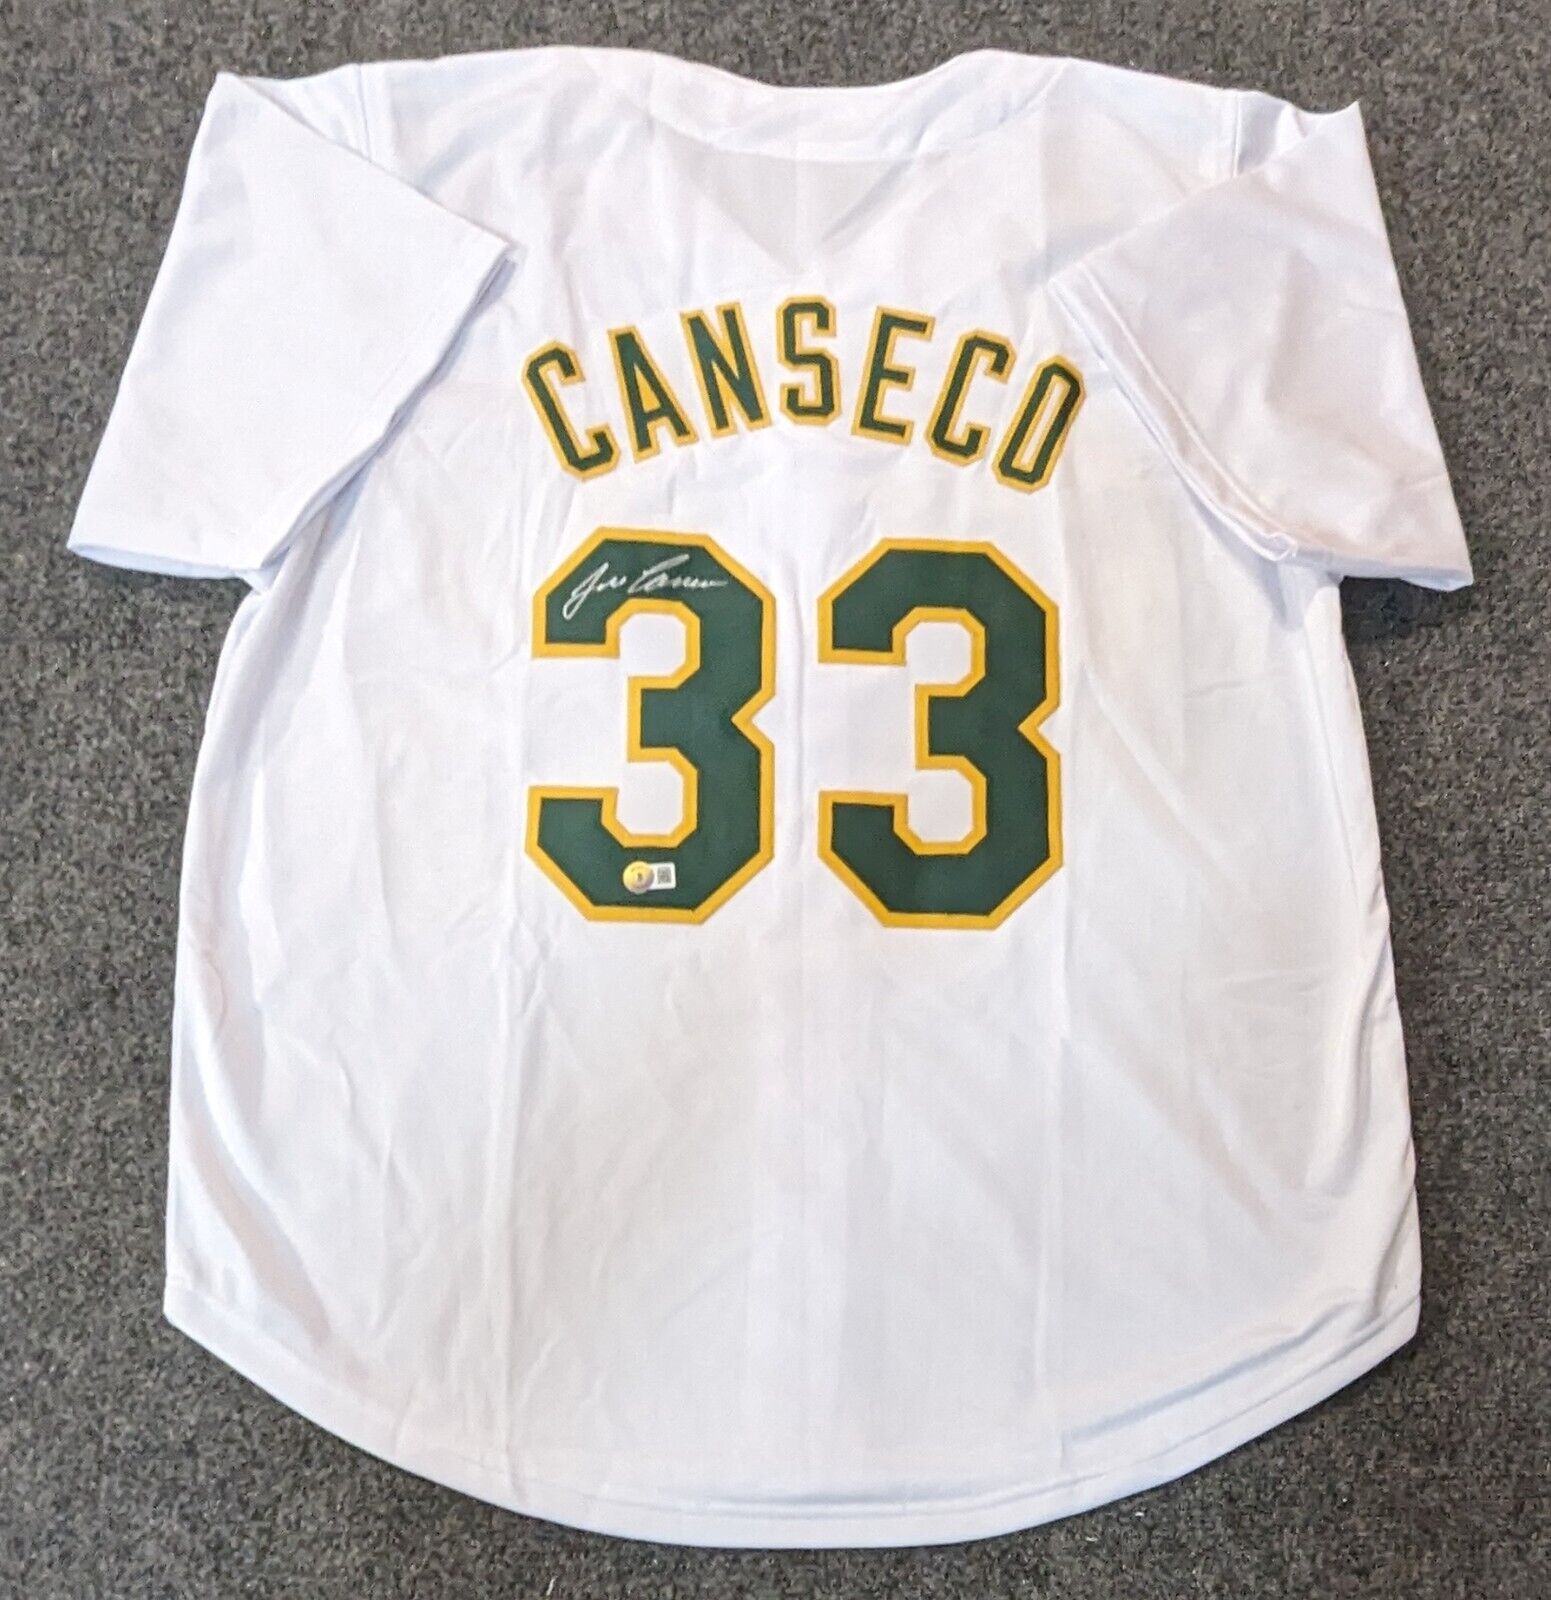 Jose Canseco Signed Red Sox Jersey (JSA COA) 6xAll Star / 2xWorld Series  Champ